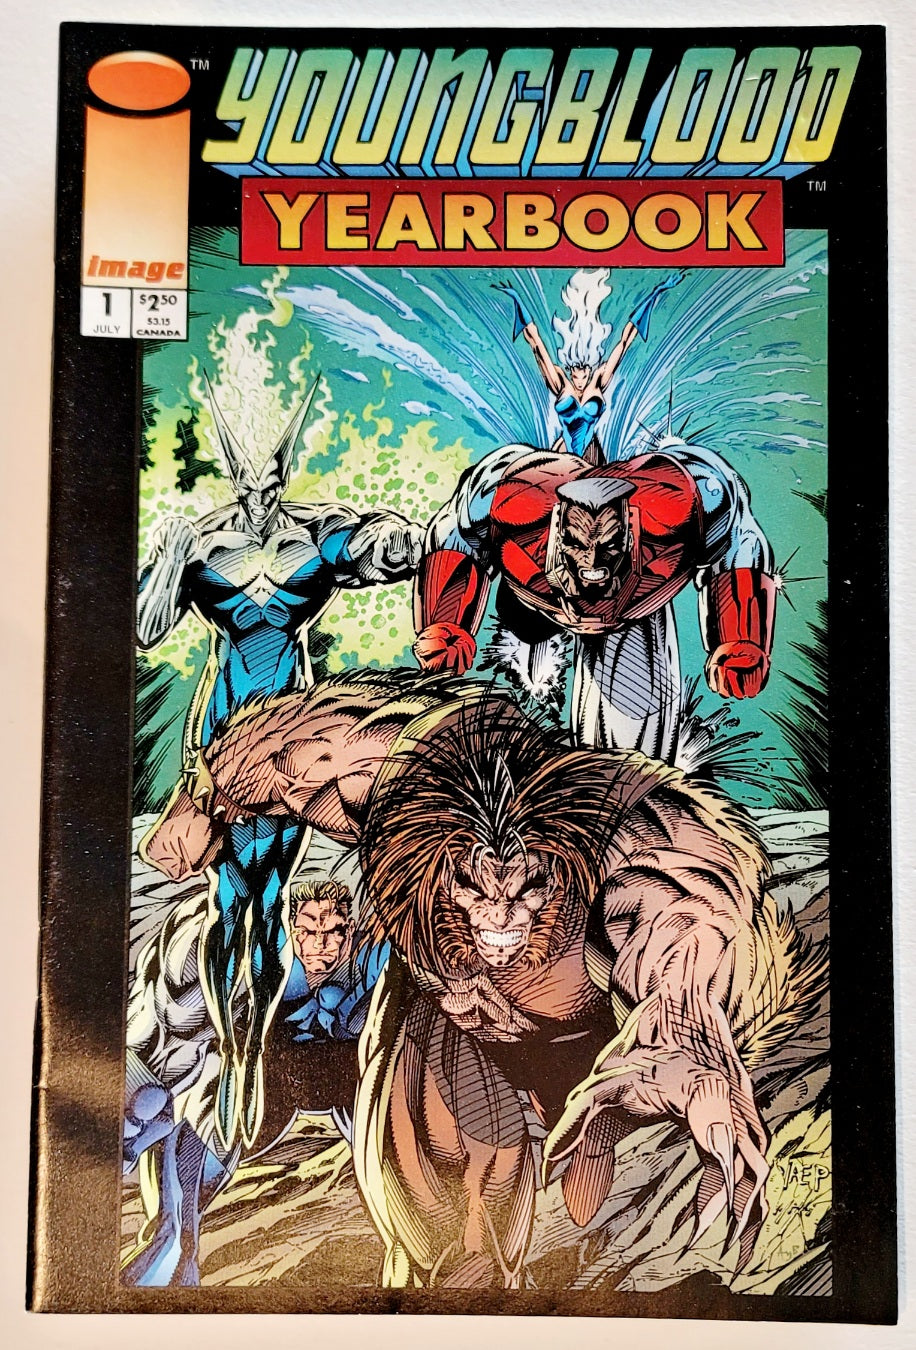 Image Comics: Youngblood - Yearbook #1